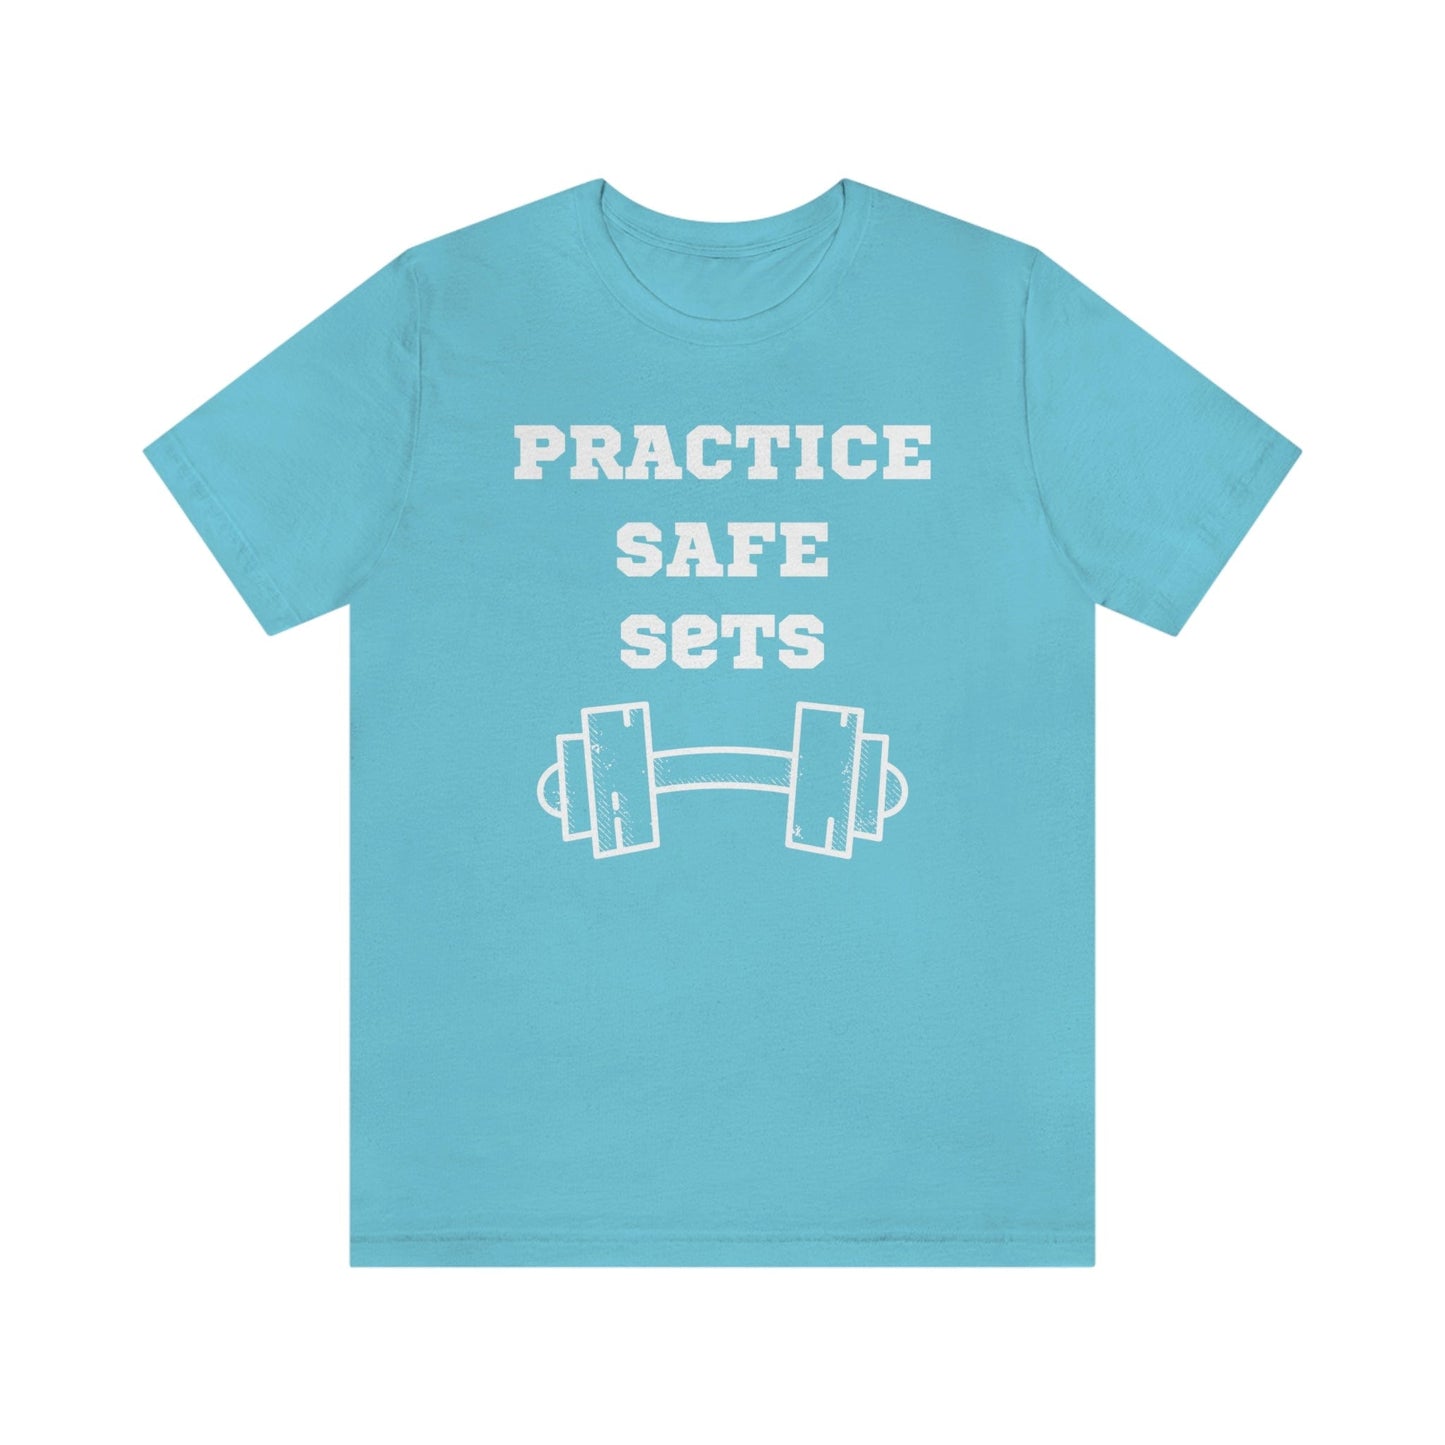 Allrj Practice safe sets tee Turquoise